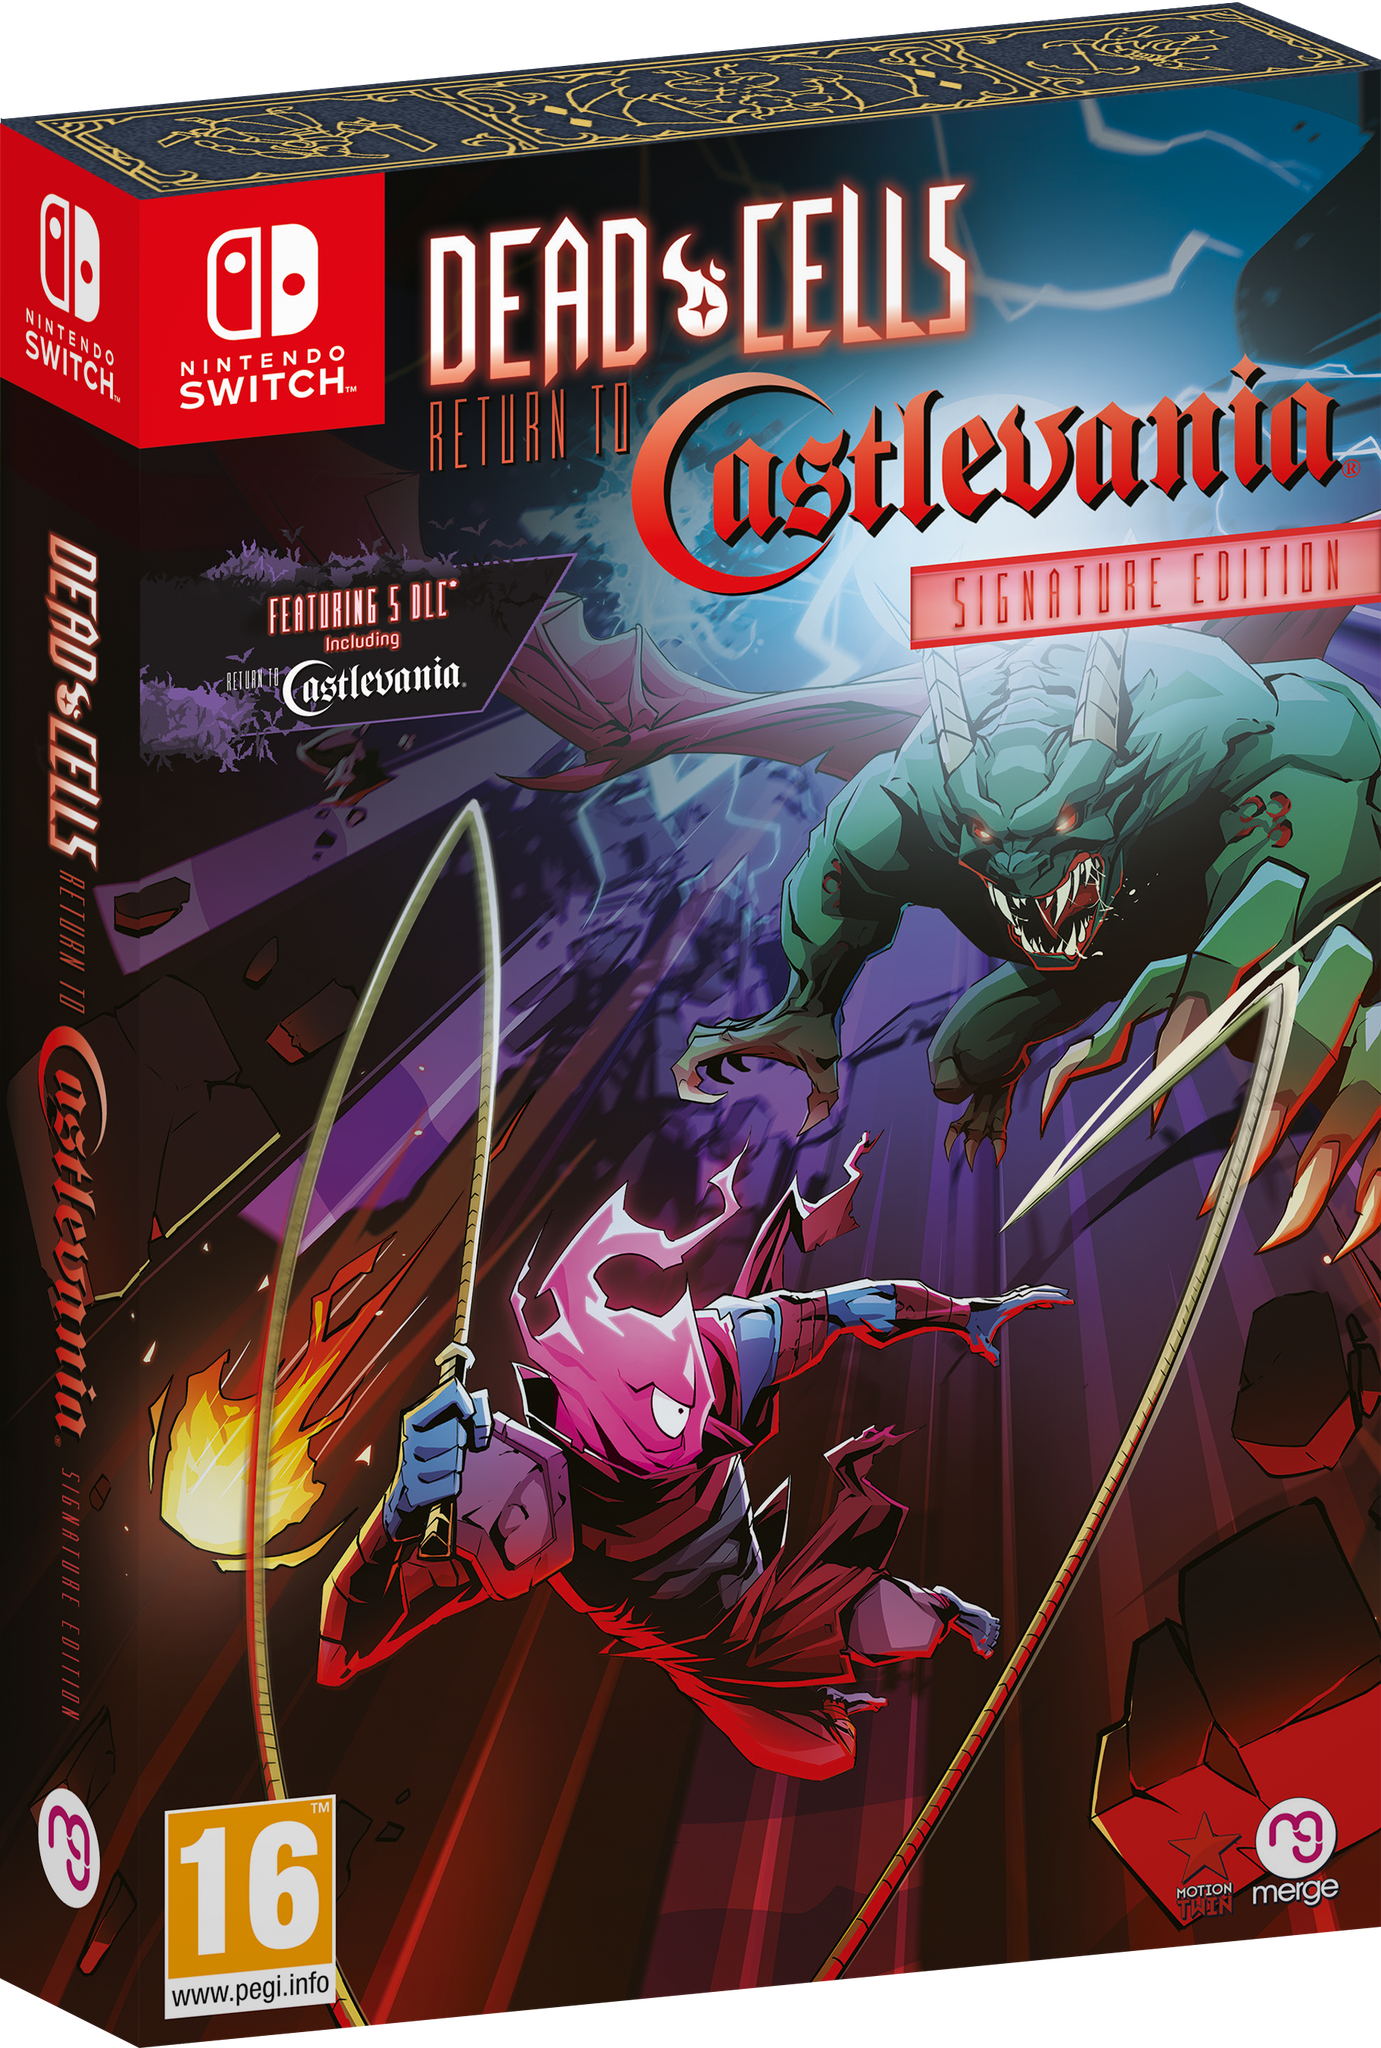 Dead Cells: Return to Castlevania - Signature Edition (Switch 